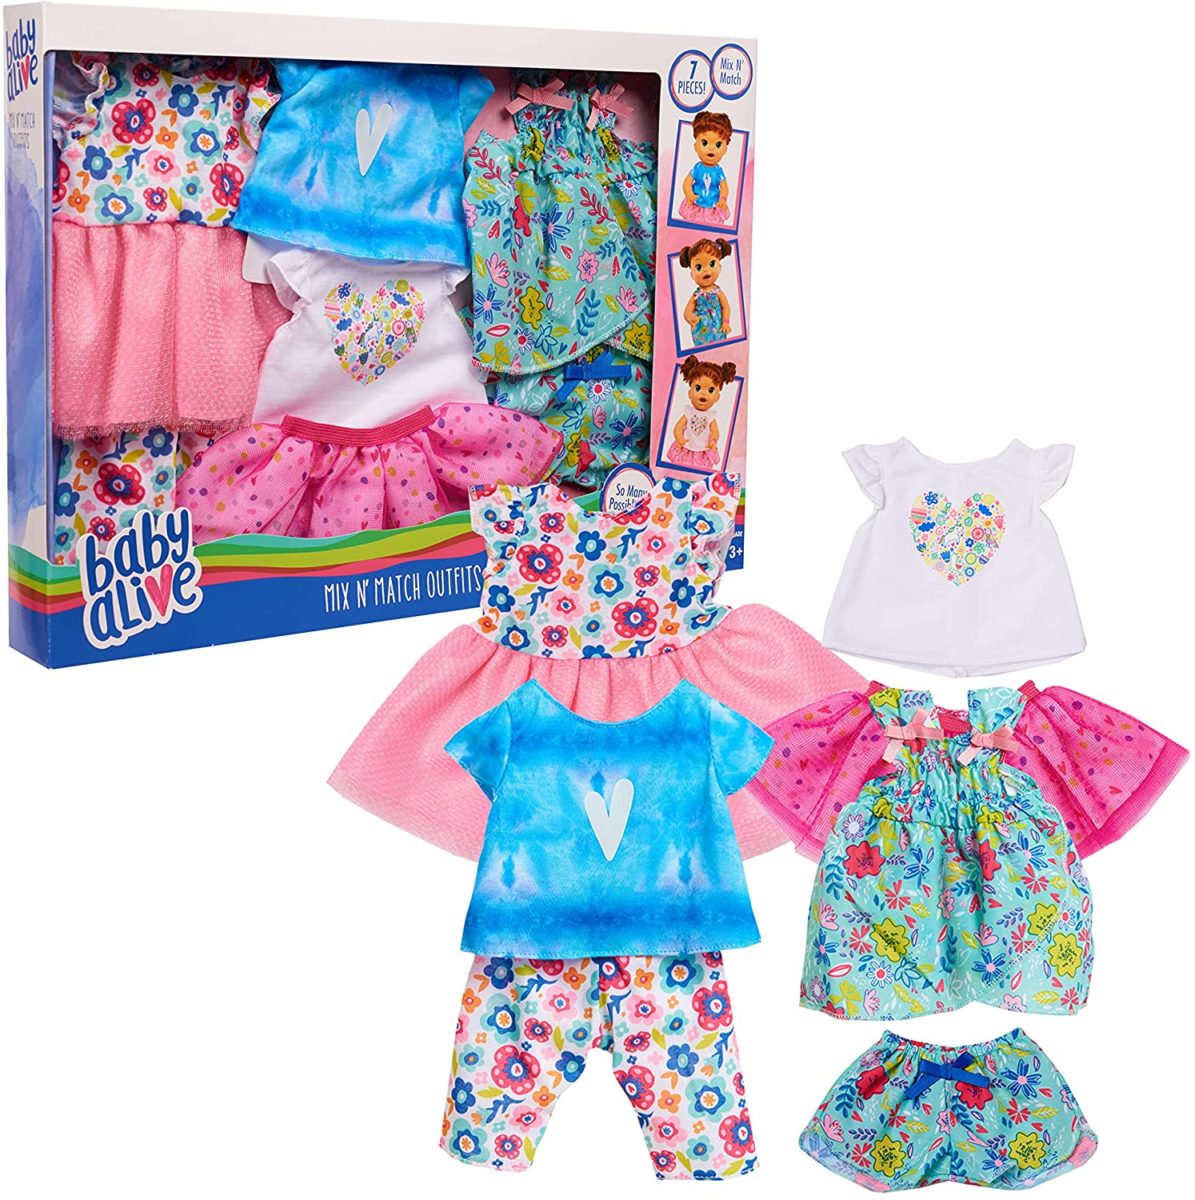 baby alive clothes that your kid will love